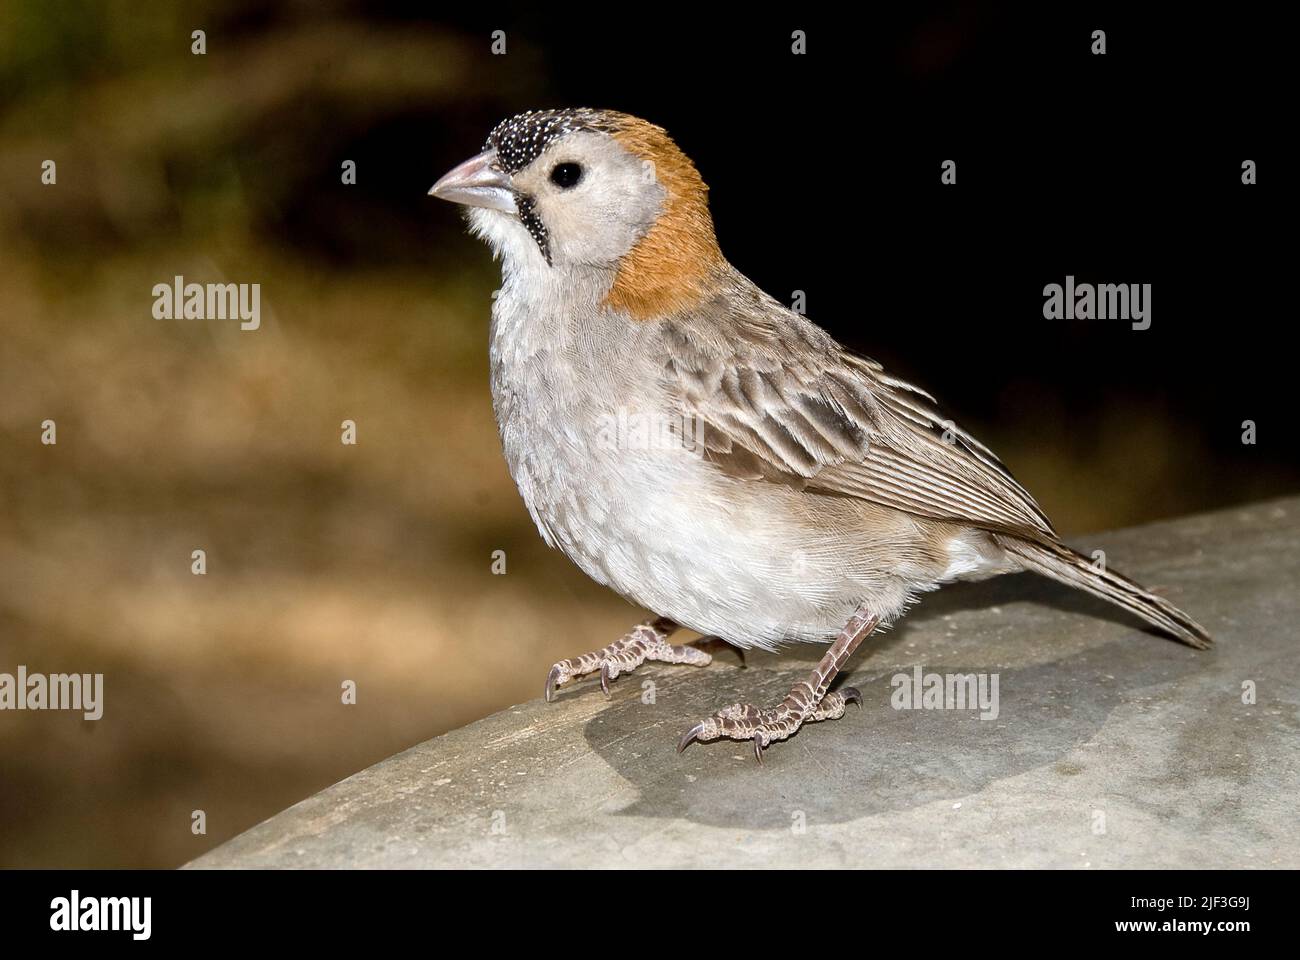 Speckle-fronted weaver (Sporopipes frontalis) from Serengeti, Tanzania. Stock Photo